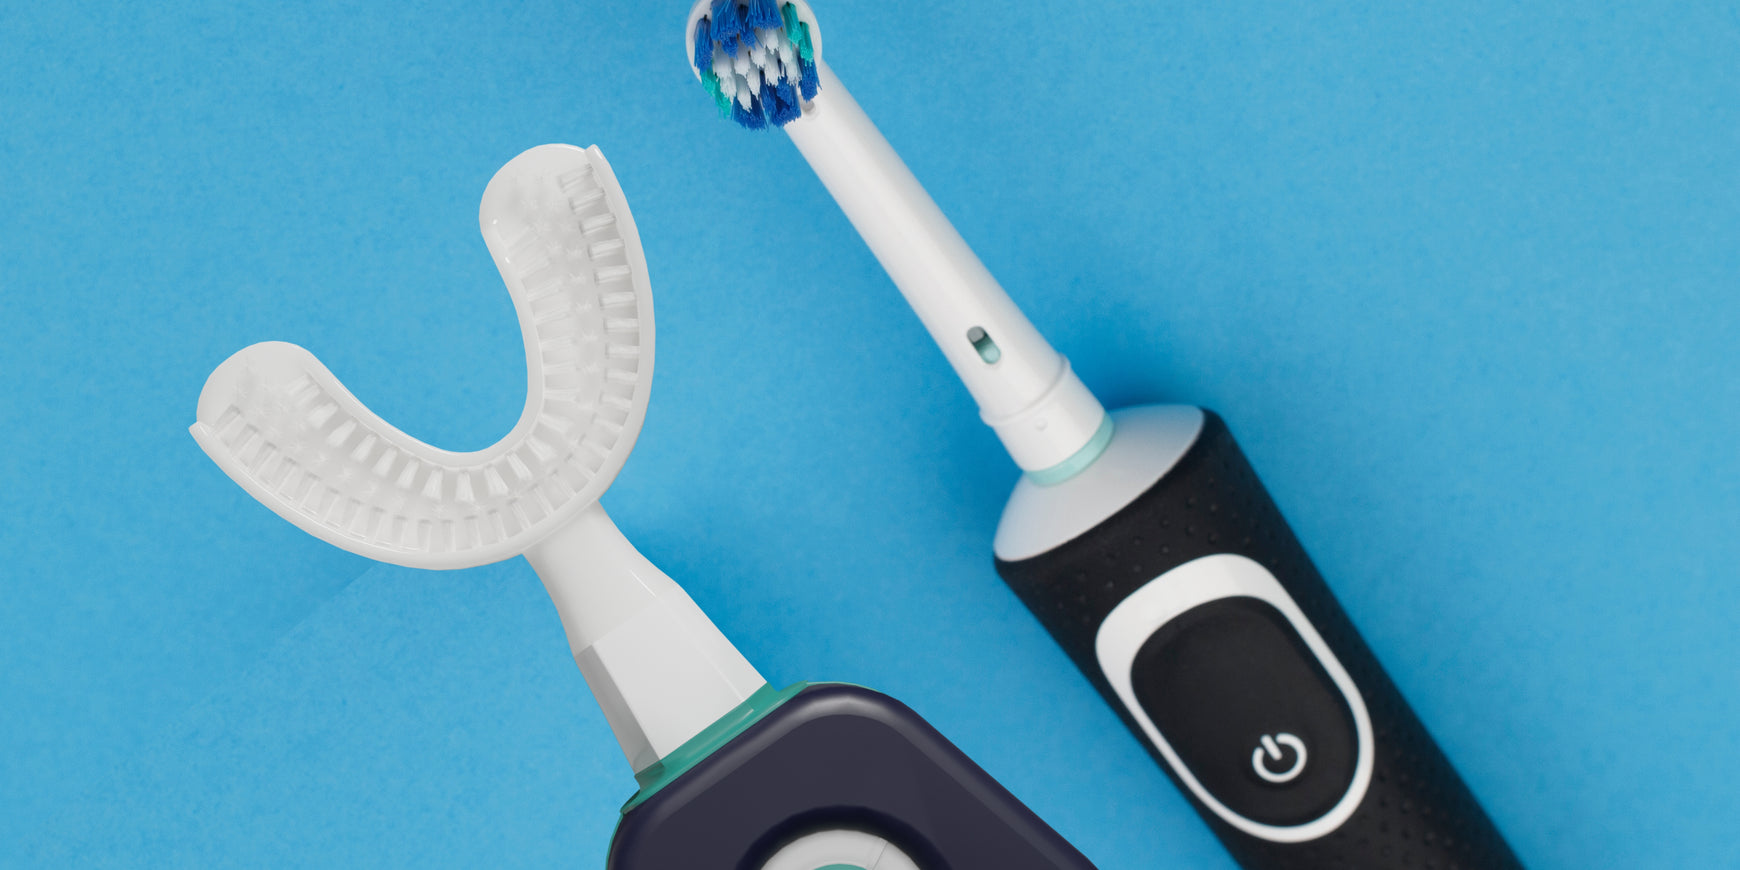 Electric Toothbrushes: Sonic Vs. Rotative - The Complete Guide to Choosing